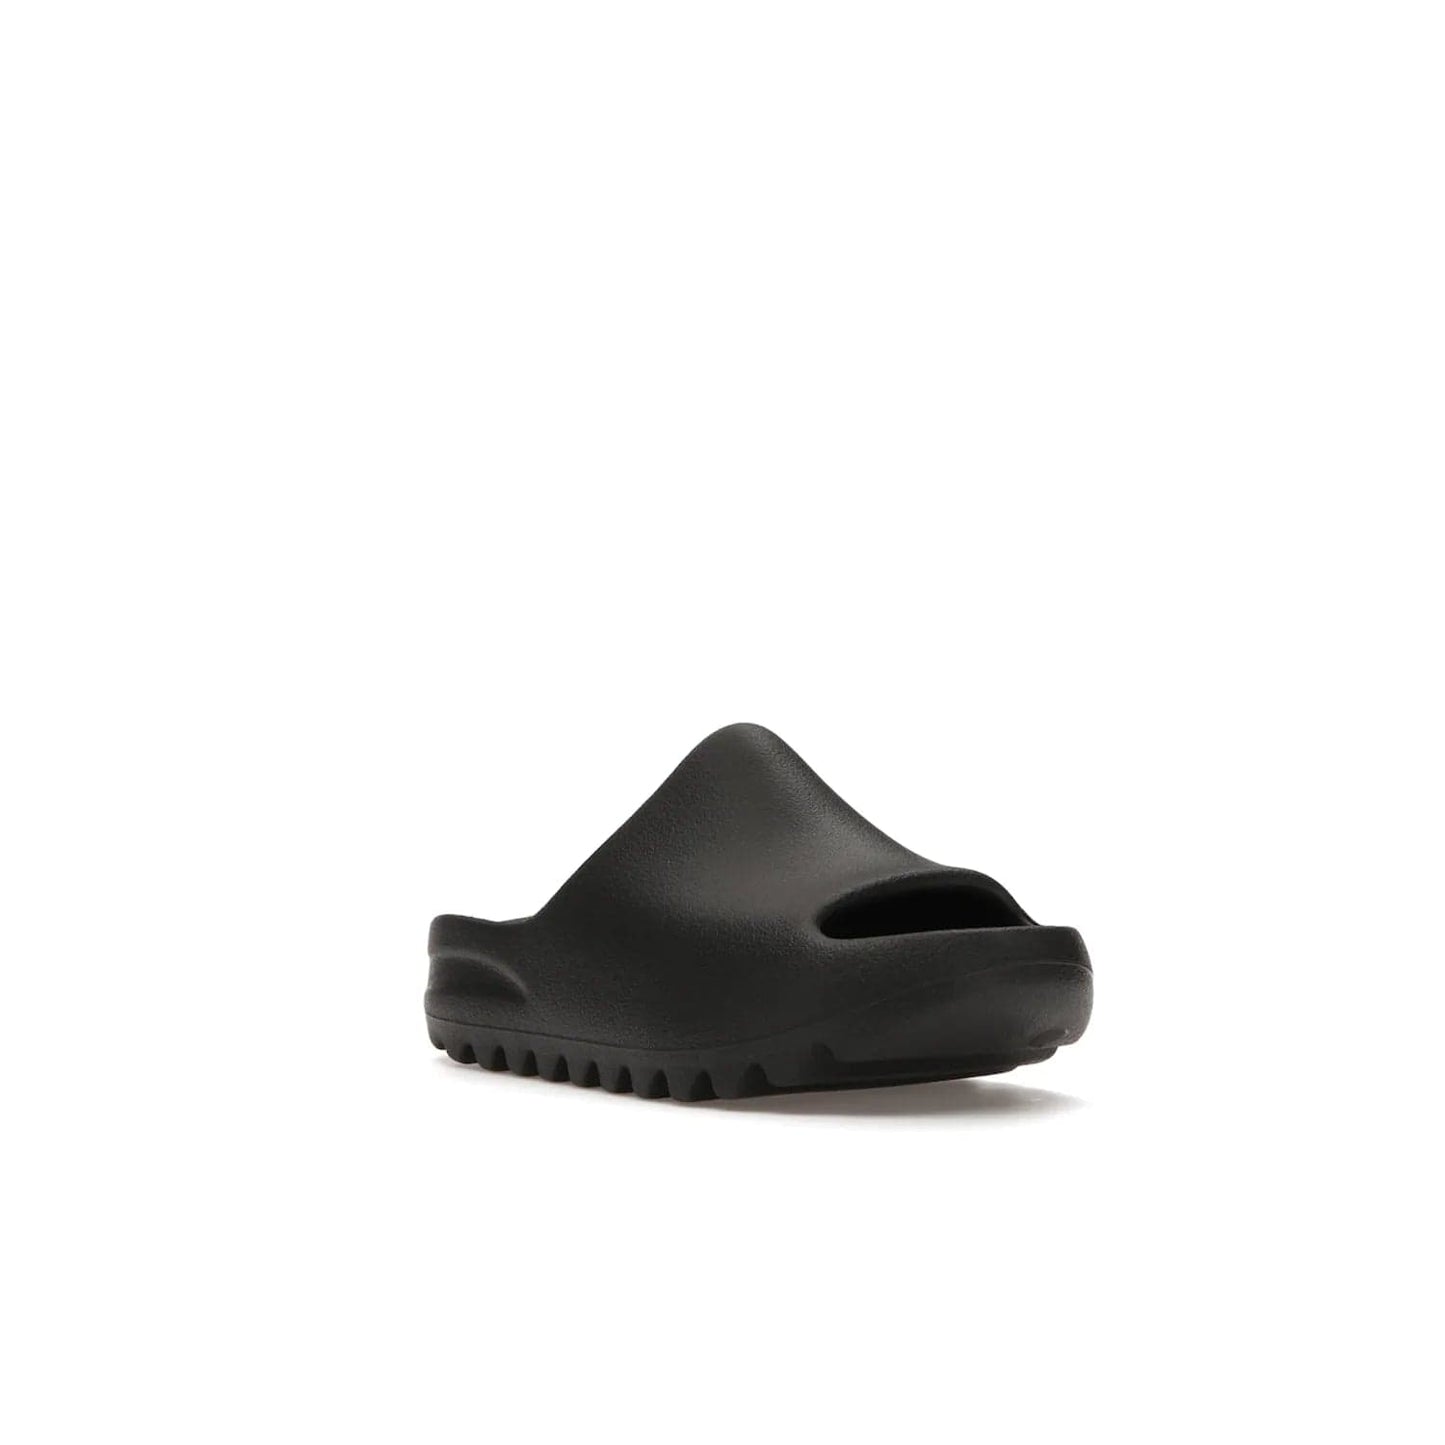 adidas Yeezy Slide Onyx (Kids) - Image 6 - Only at www.BallersClubKickz.com - adidas Yeezy Slide Onyx (Kids): Comfortable foam construction with textured surface and iconic three-stripe logo. Breathable, open-toe design and deep grooves for traction. Released in March 2021 at $50.